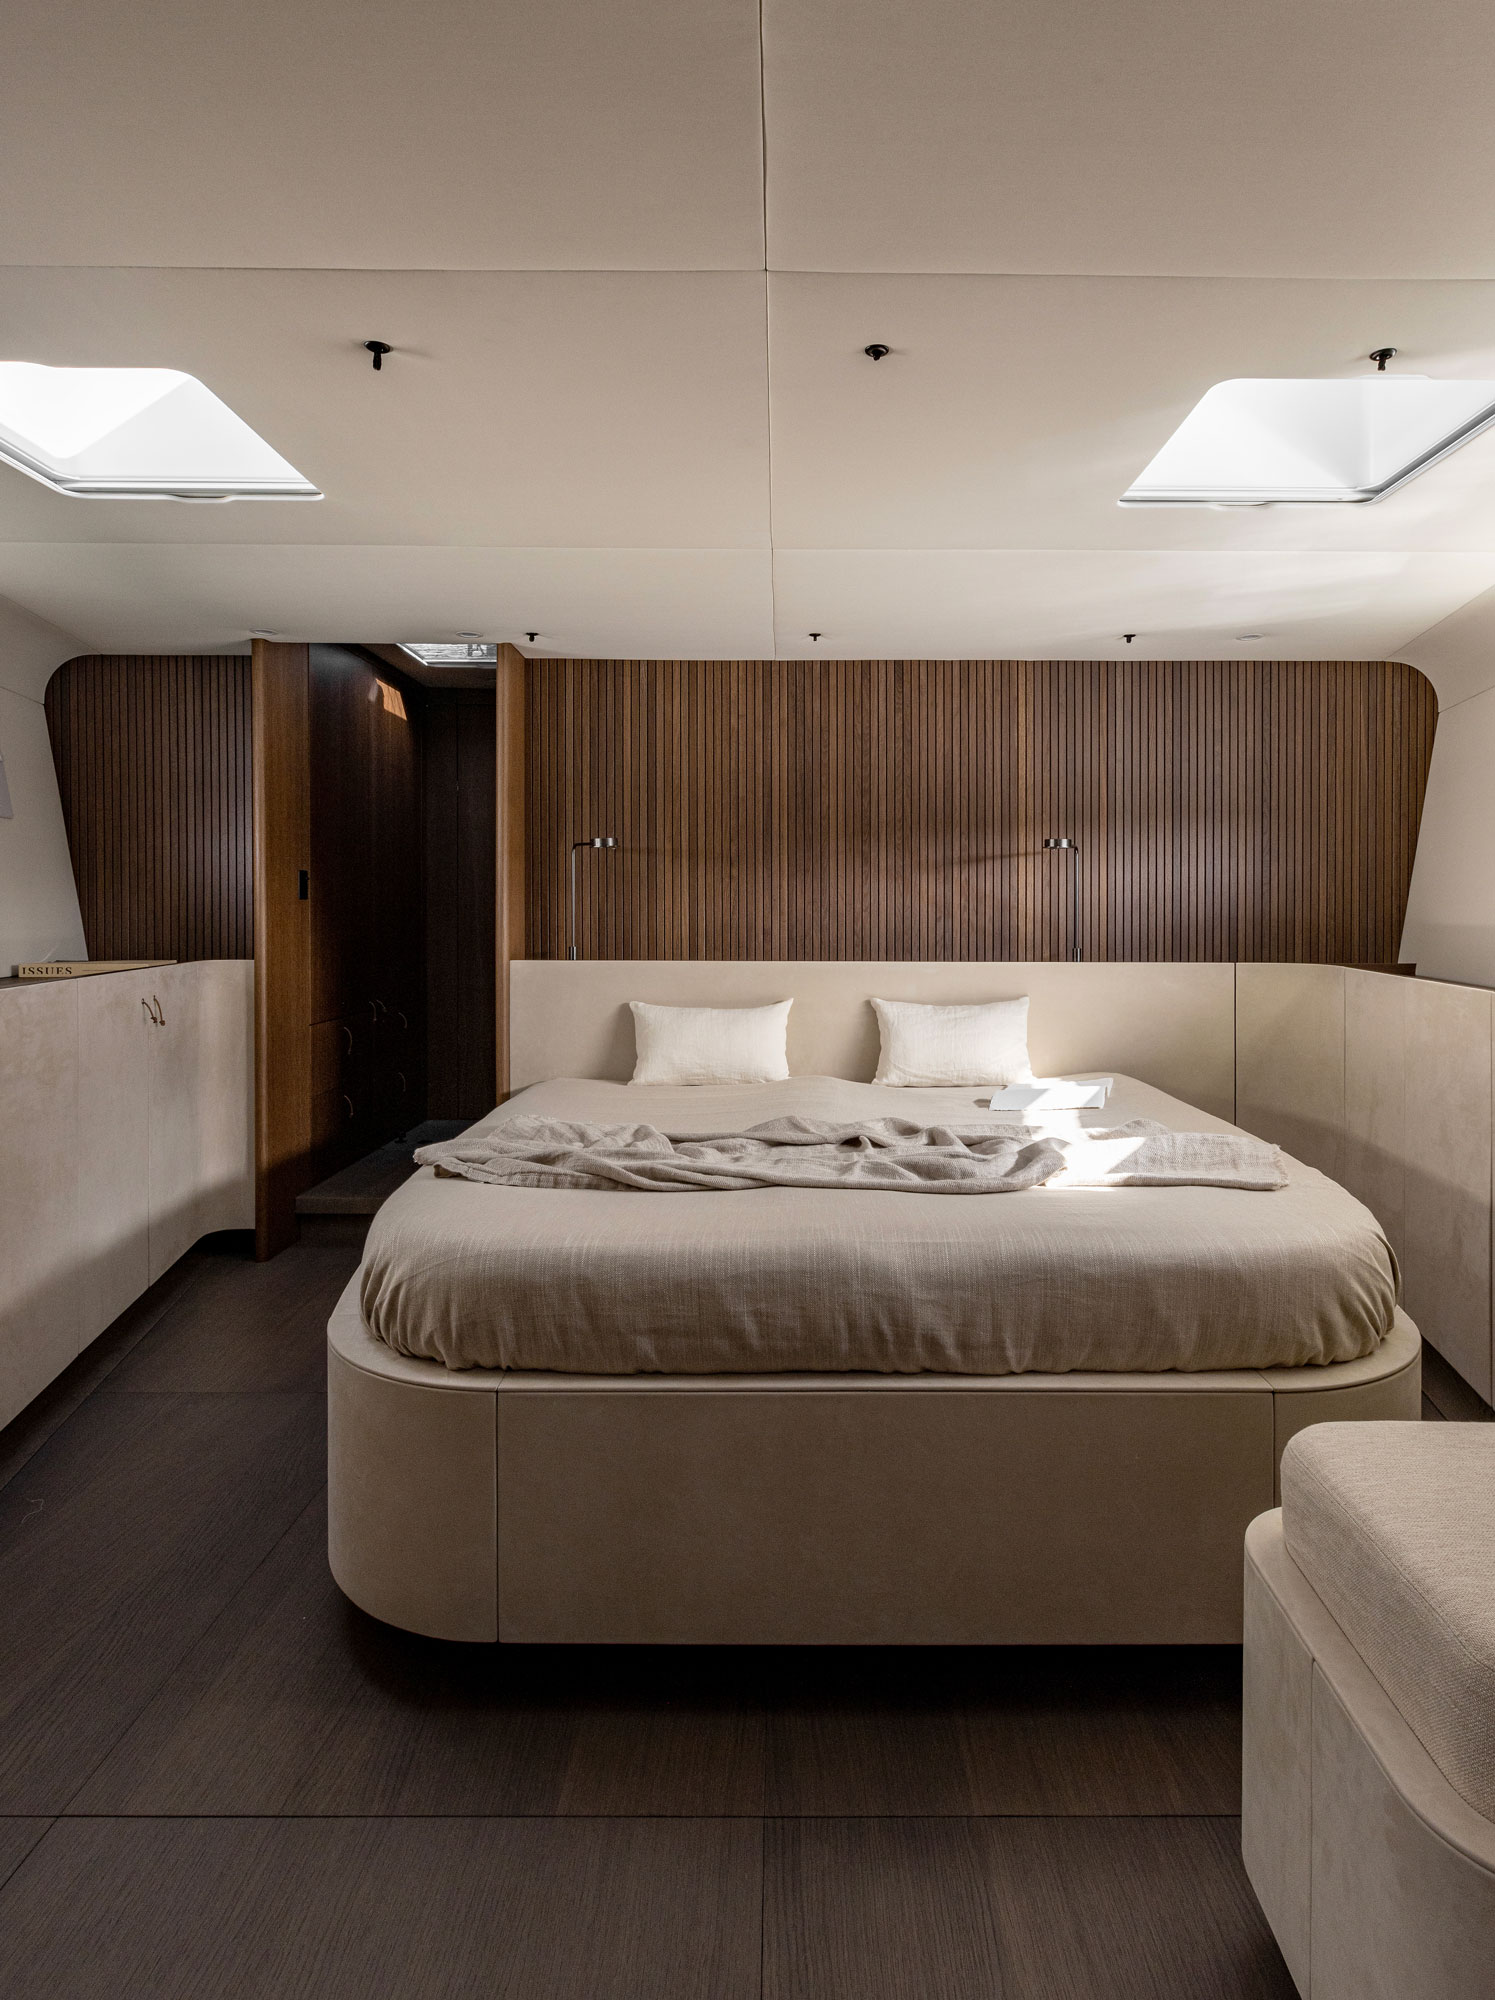 The Y/Yachts model Y9 brings an exclusive feel - through tactile surfaces and natural materials - to the bedroom.